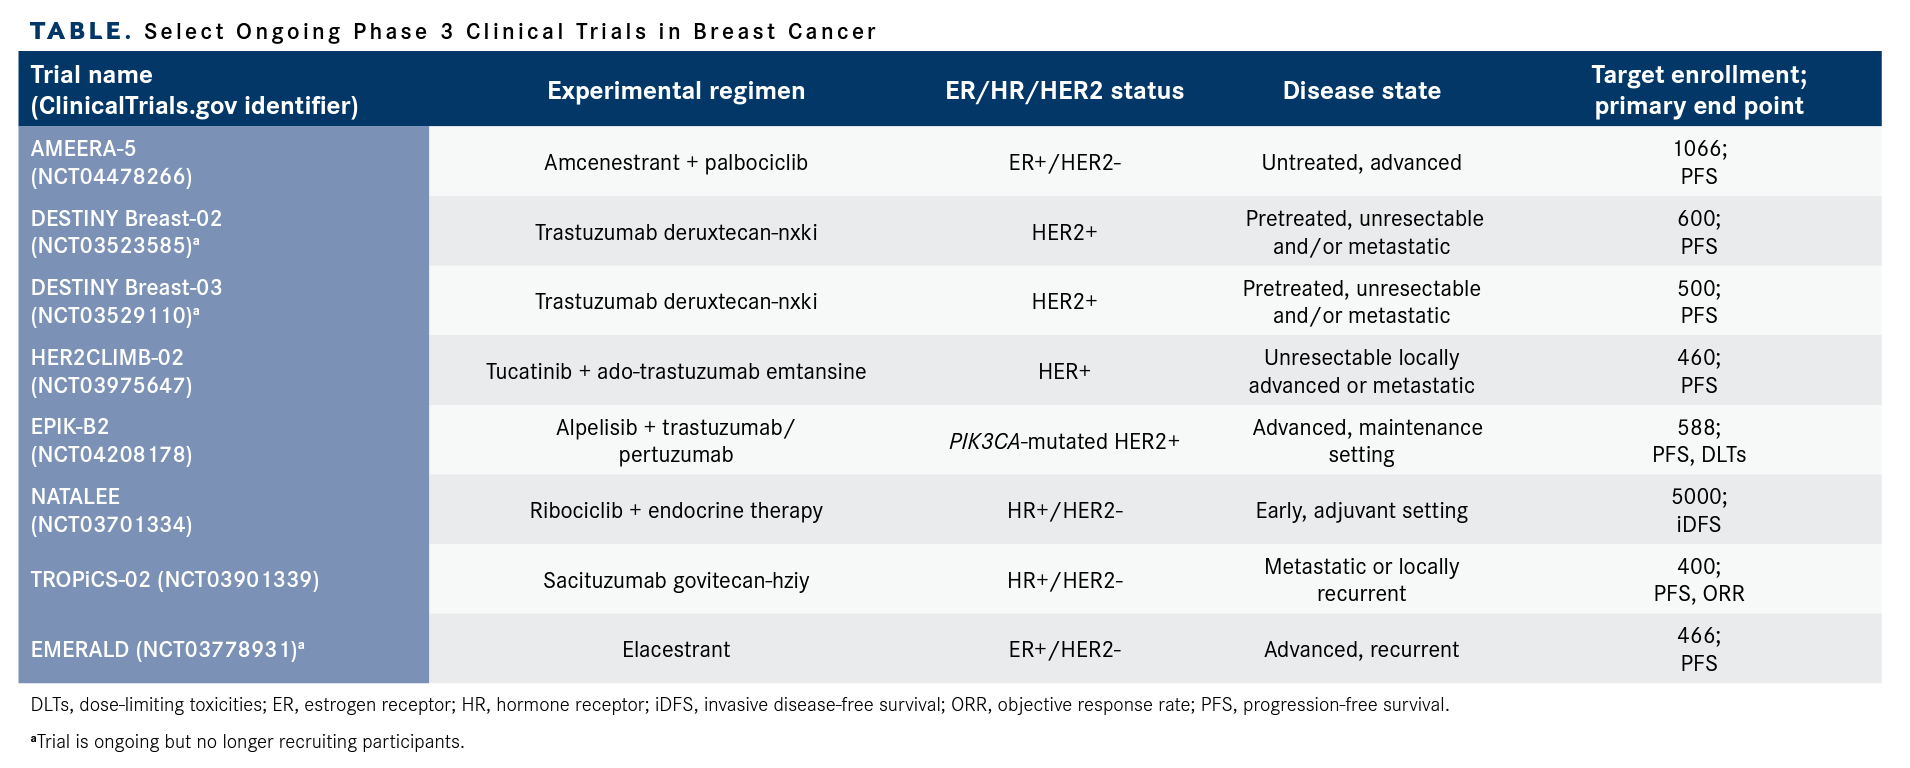 Select Ongoing Phase 3 Clinical Trials in Breast Cancer